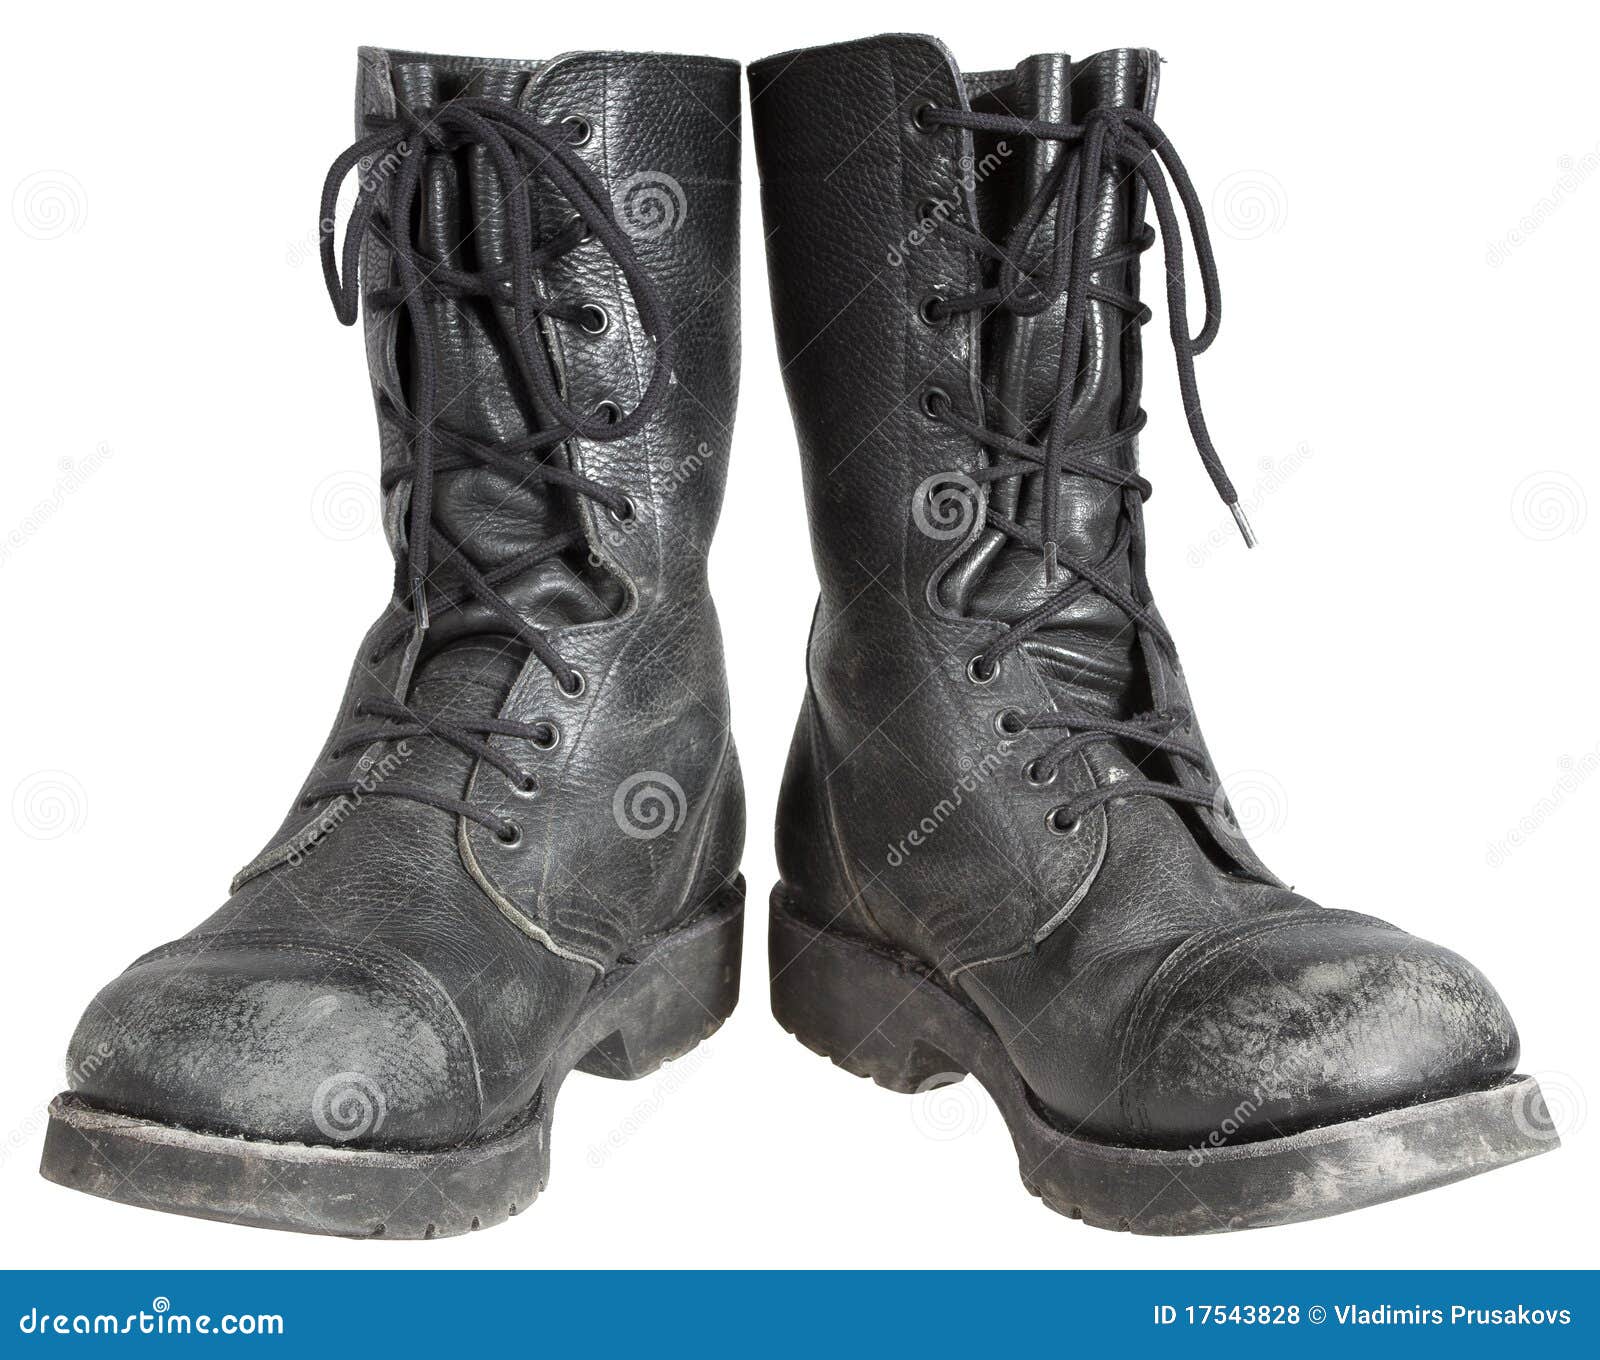 military-boots-17543828.jpg